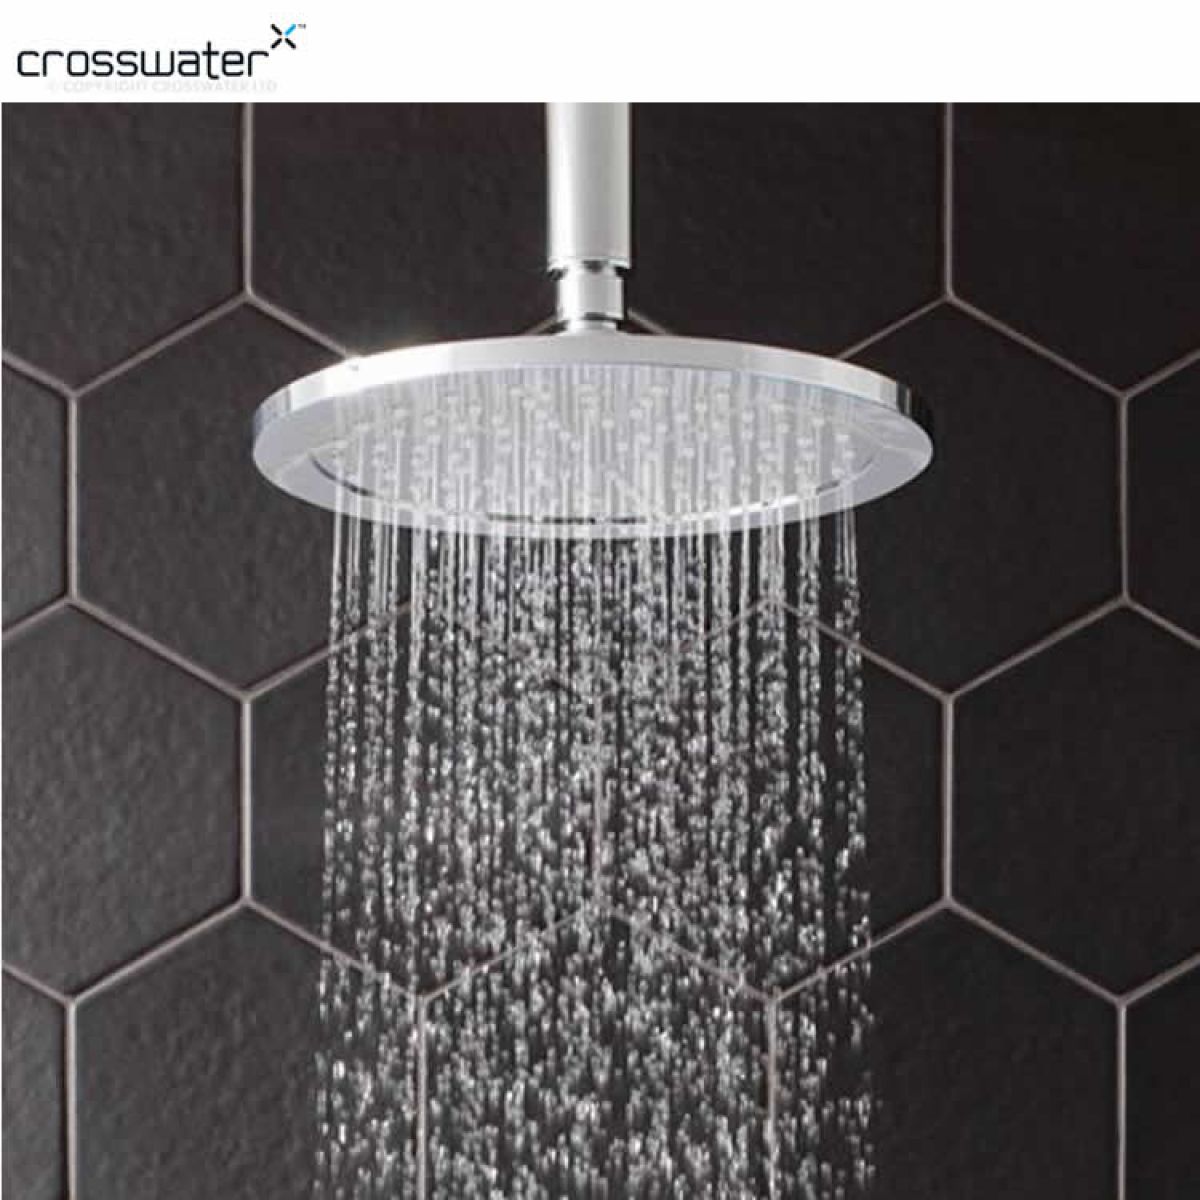 Crosswater Dial Fixed Shower Head 